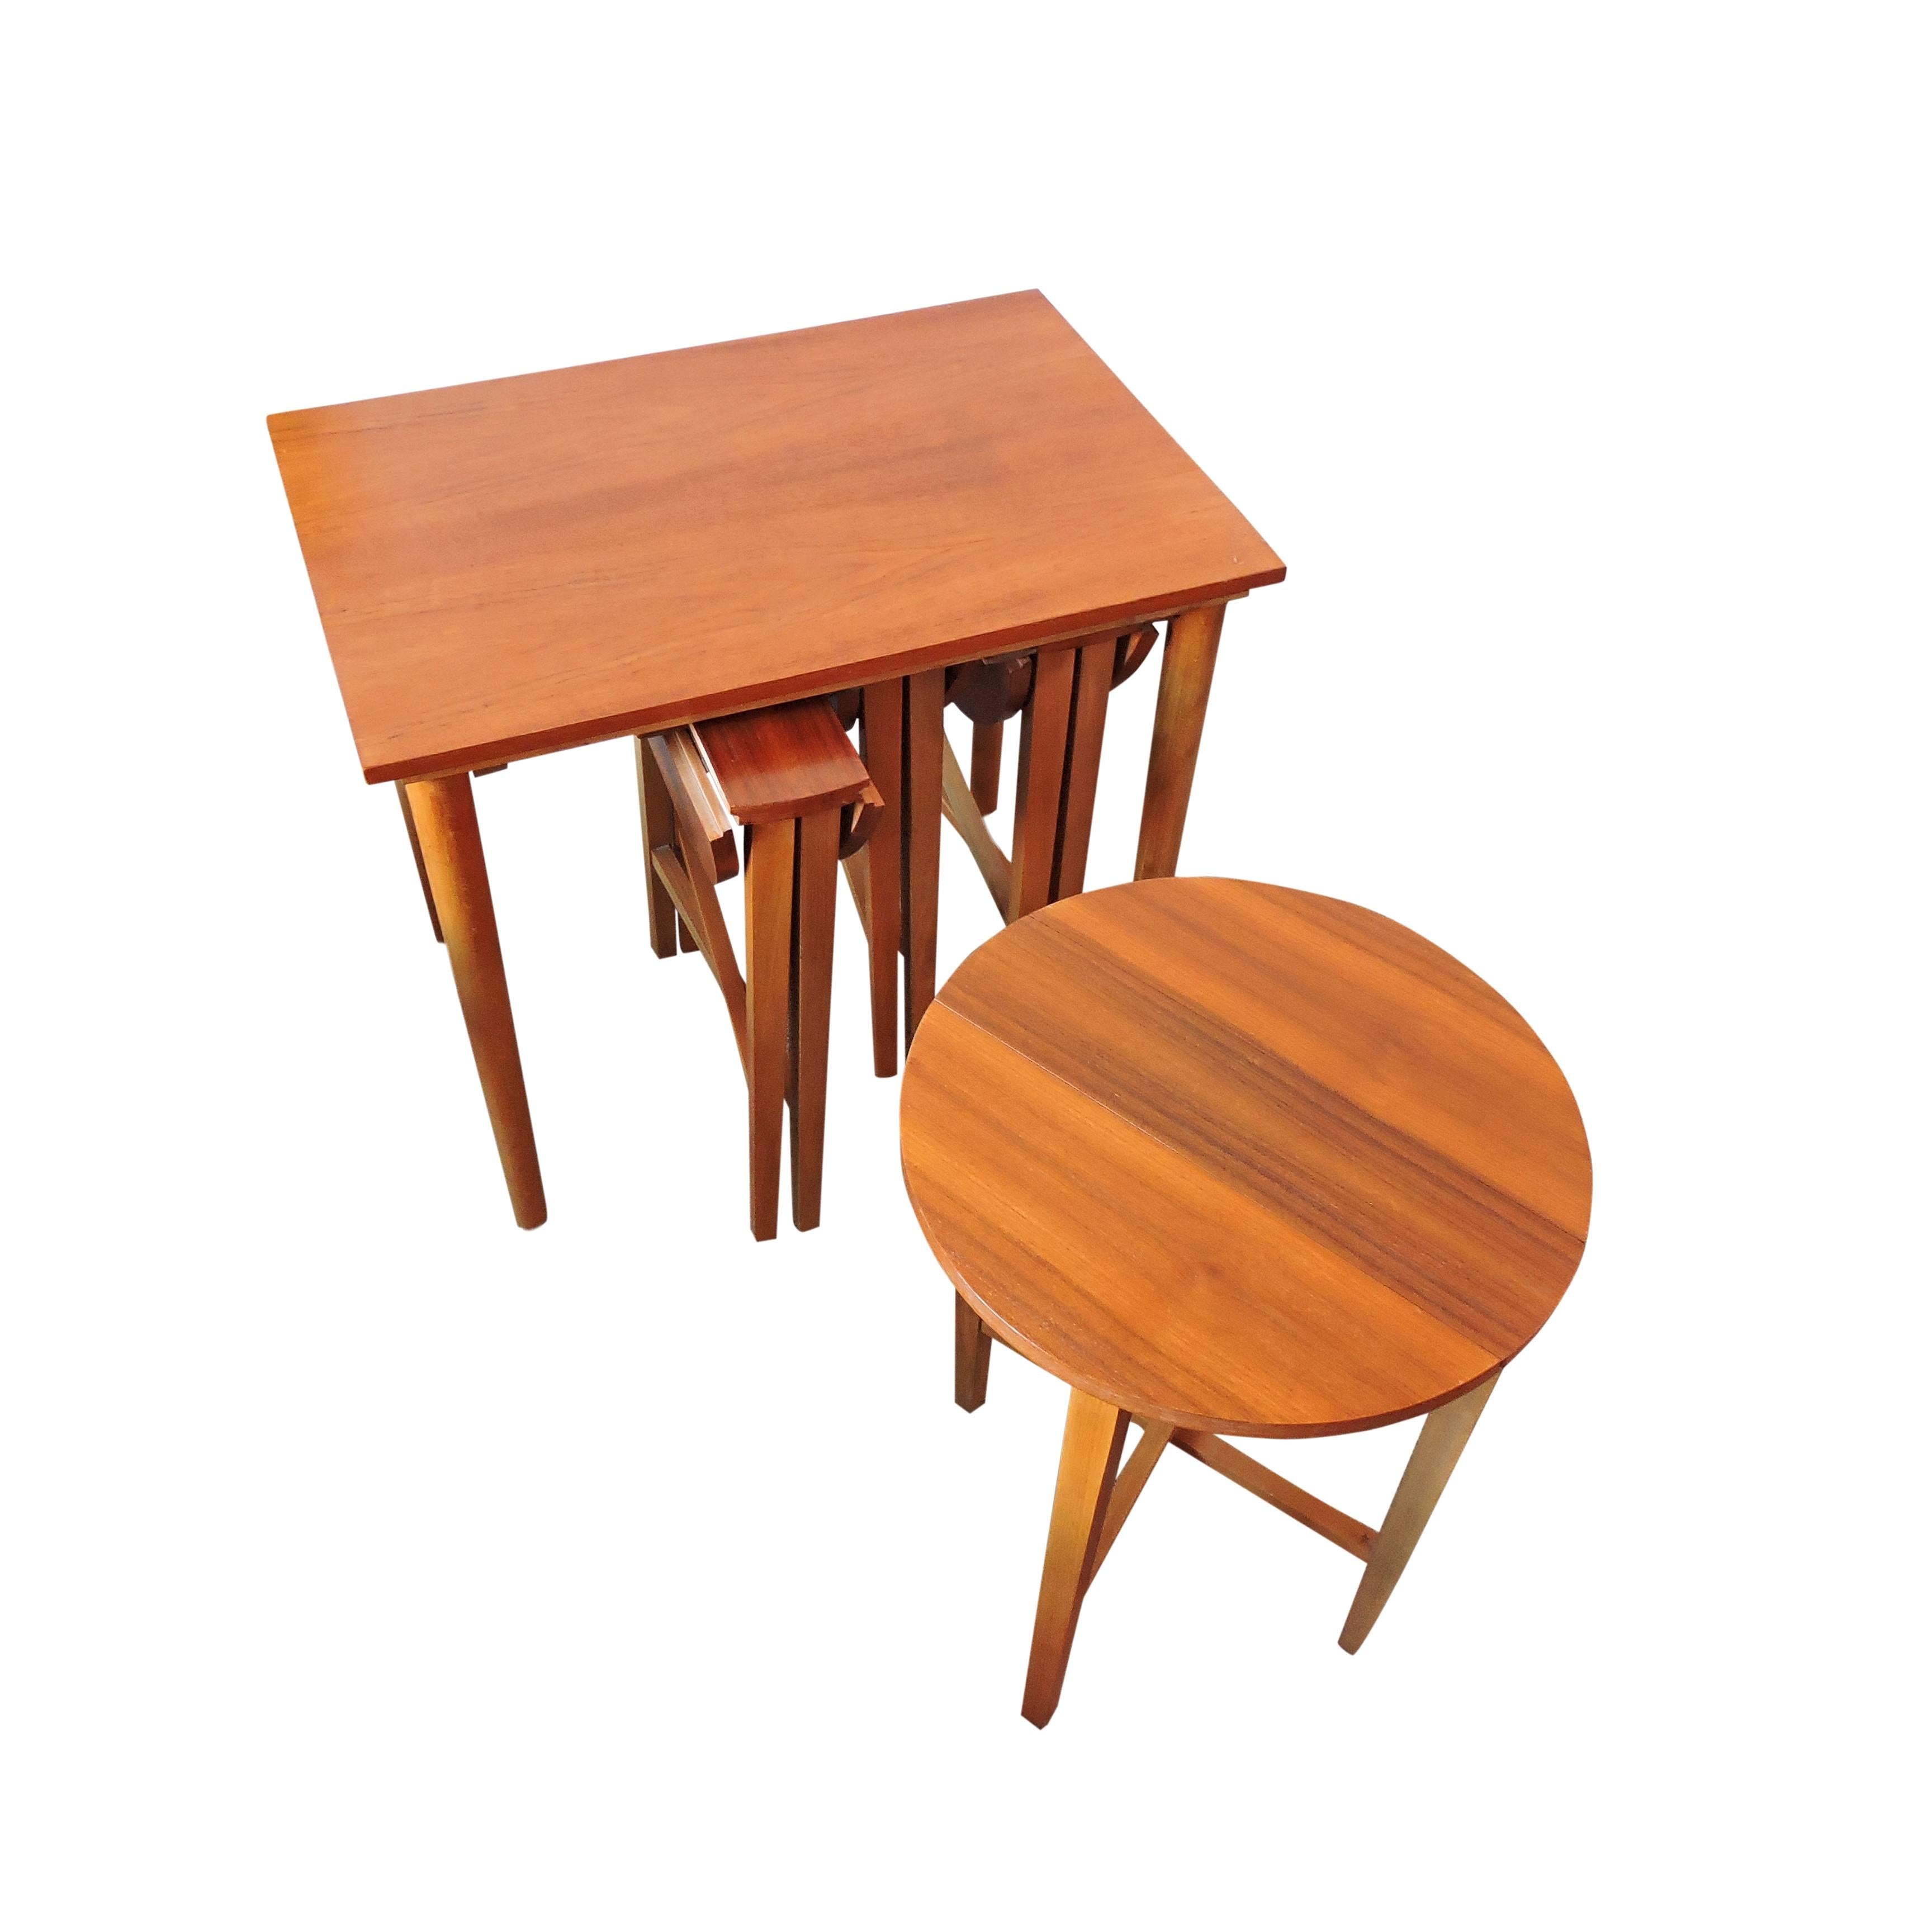 This set consists of a rectangular side table with four folding side tables that slide underneath.